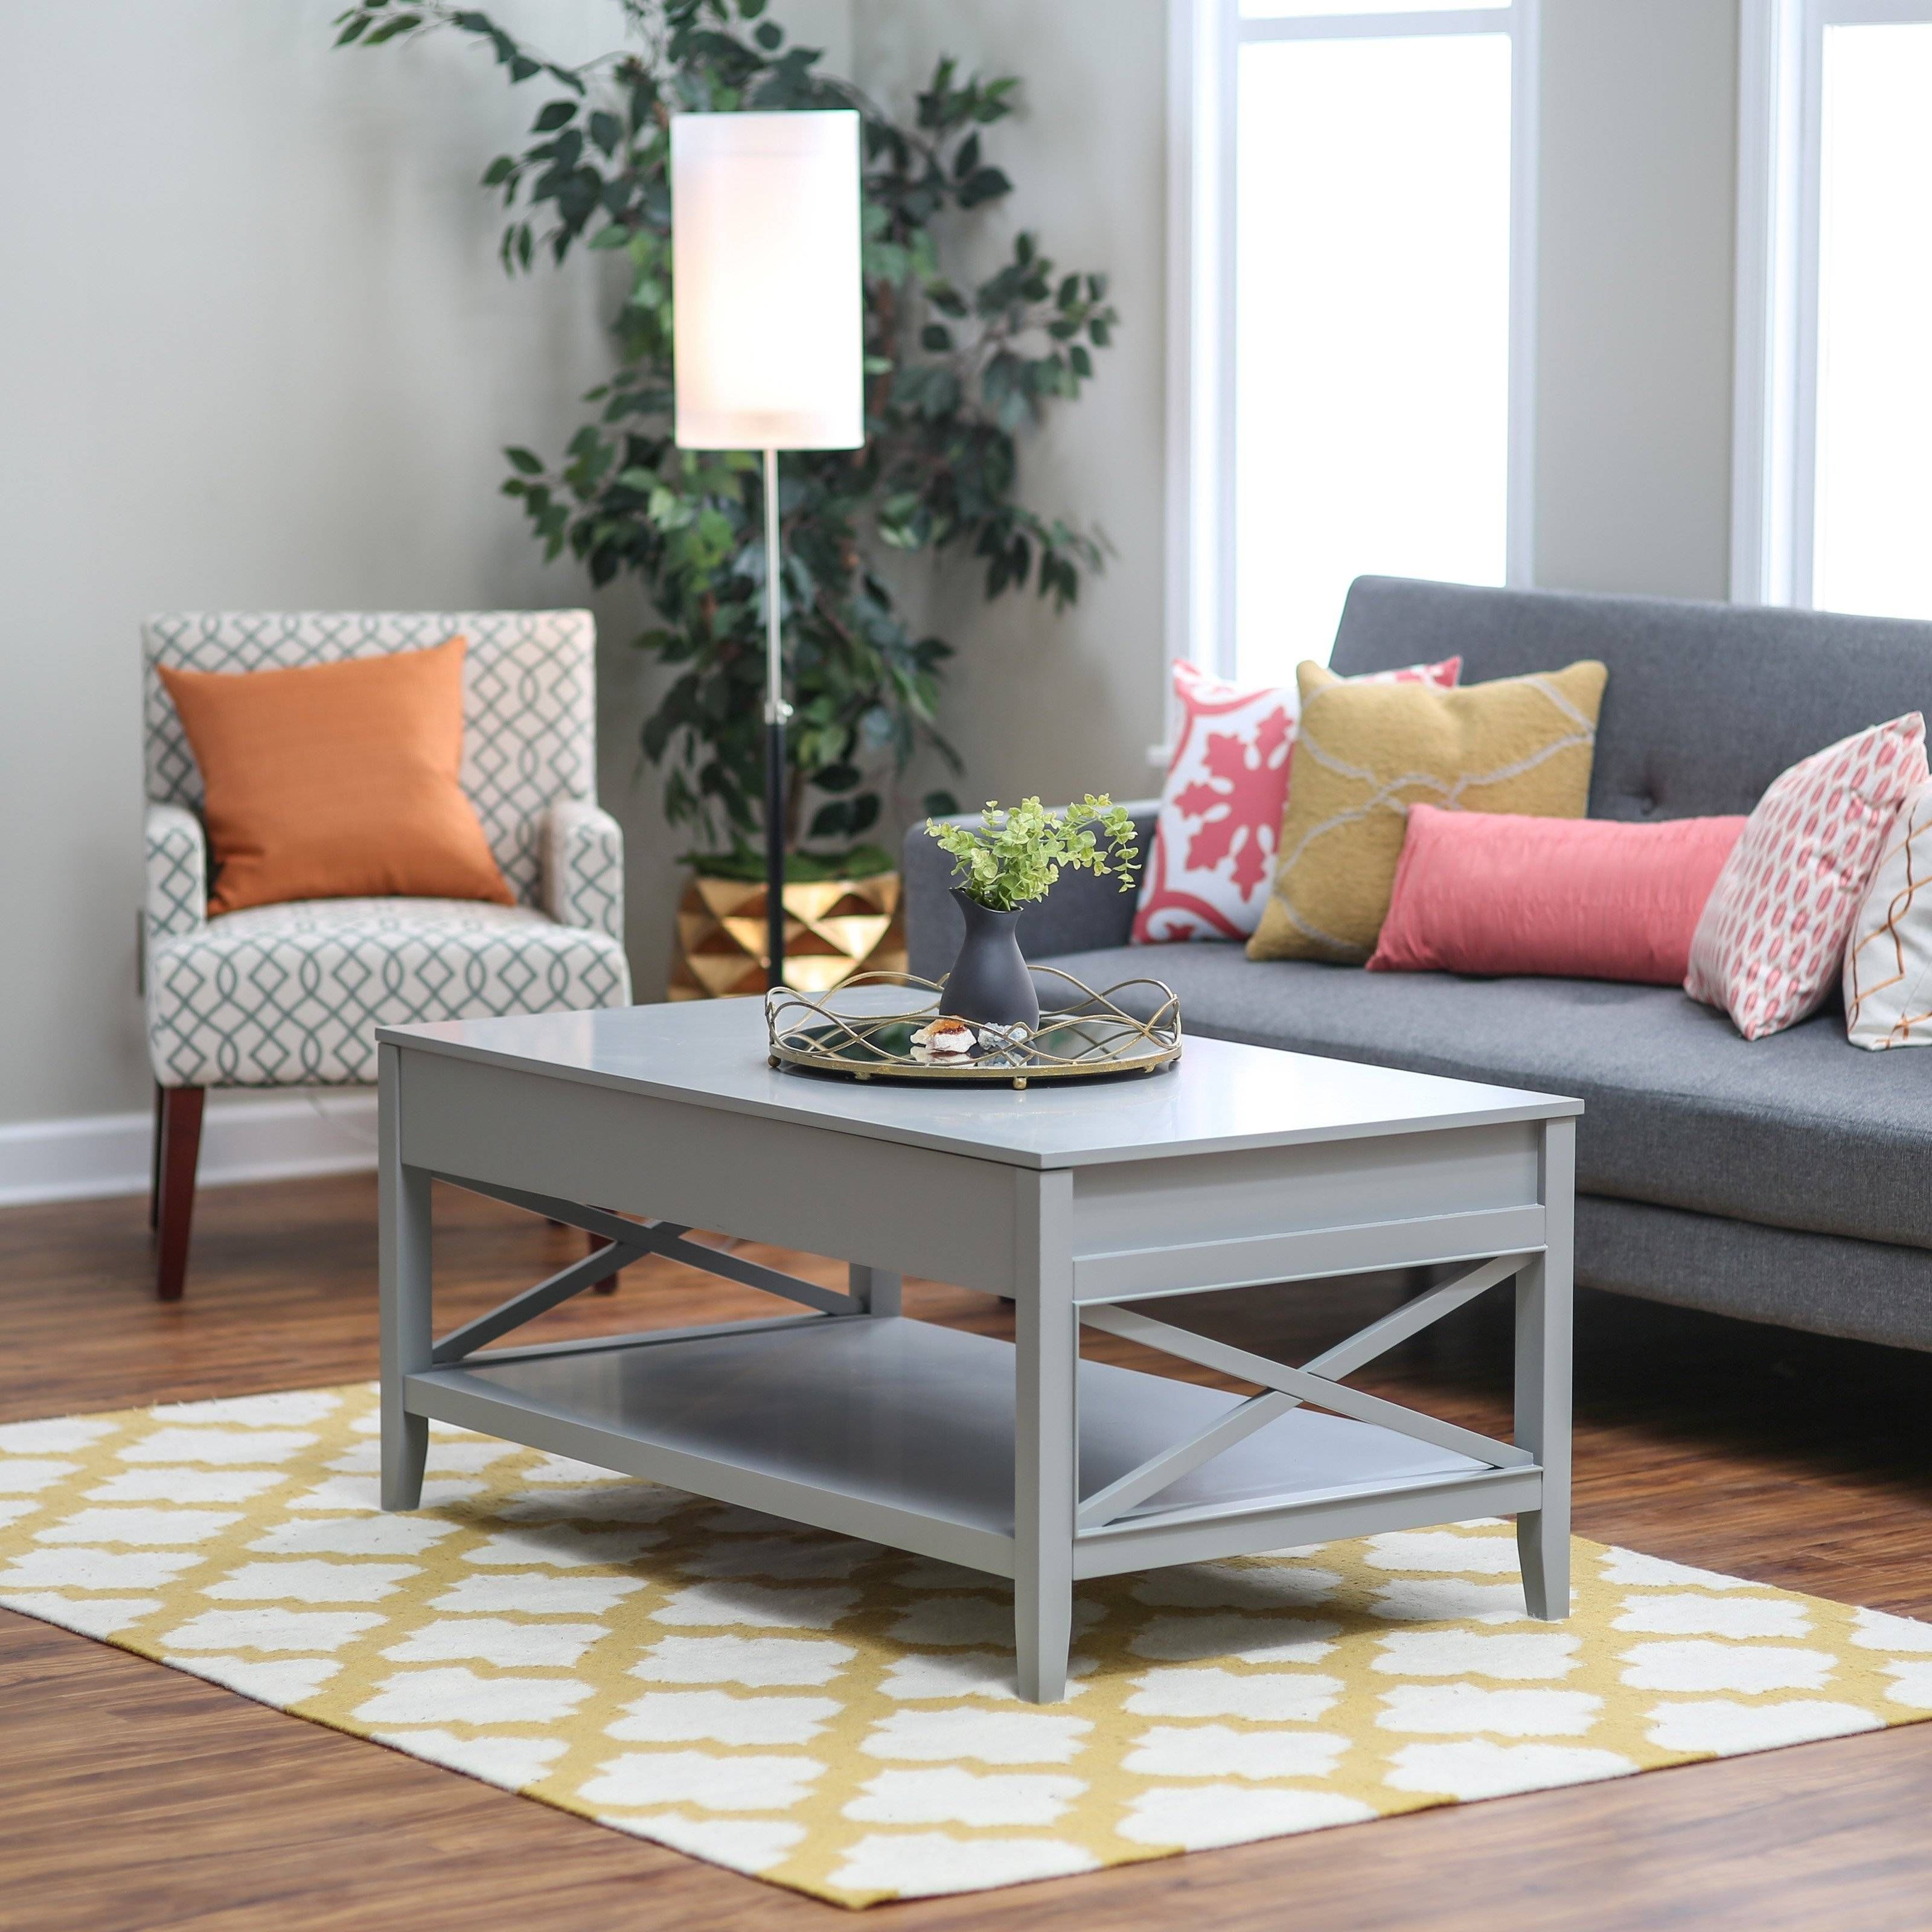 Turner Lift Top Coffee Table – Gray | Hayneedle Throughout Coffee Table With Raised Top (View 30 of 30)